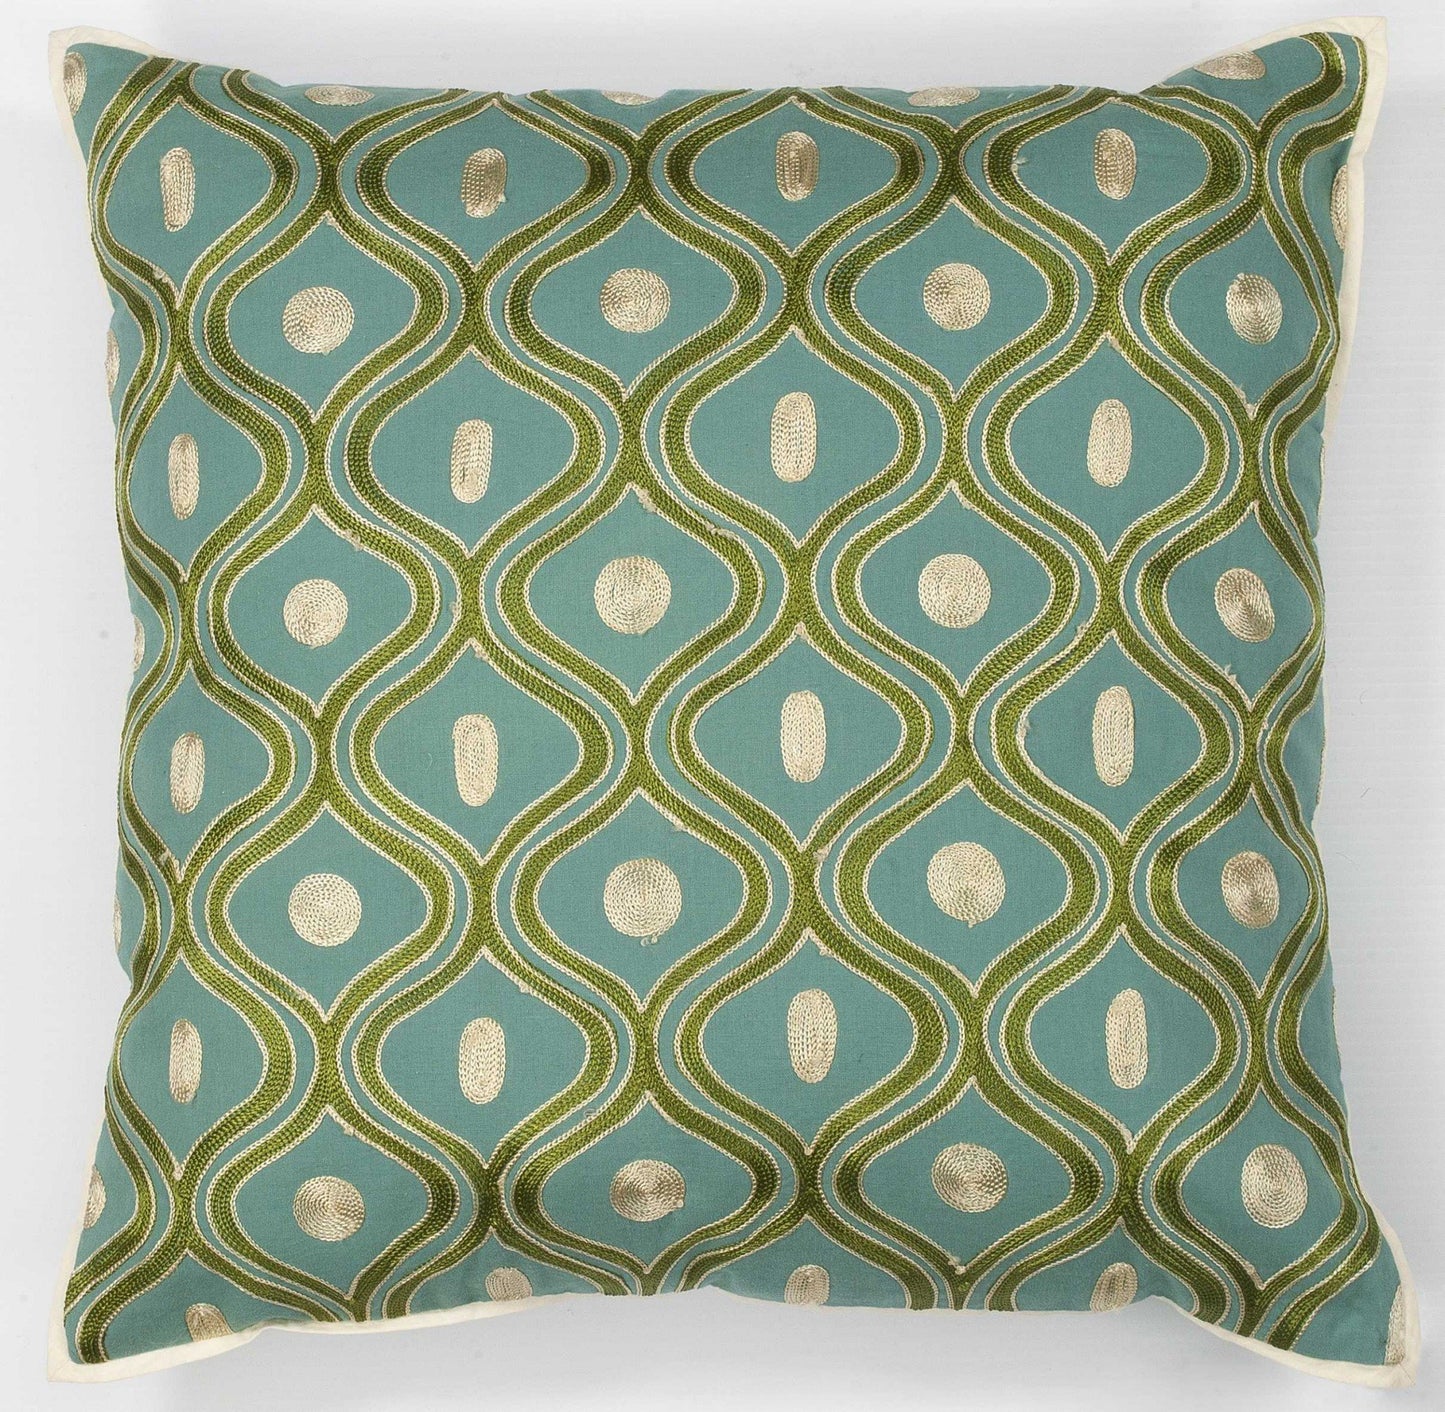 Elegant Square Teal and Gold Accent Pillow